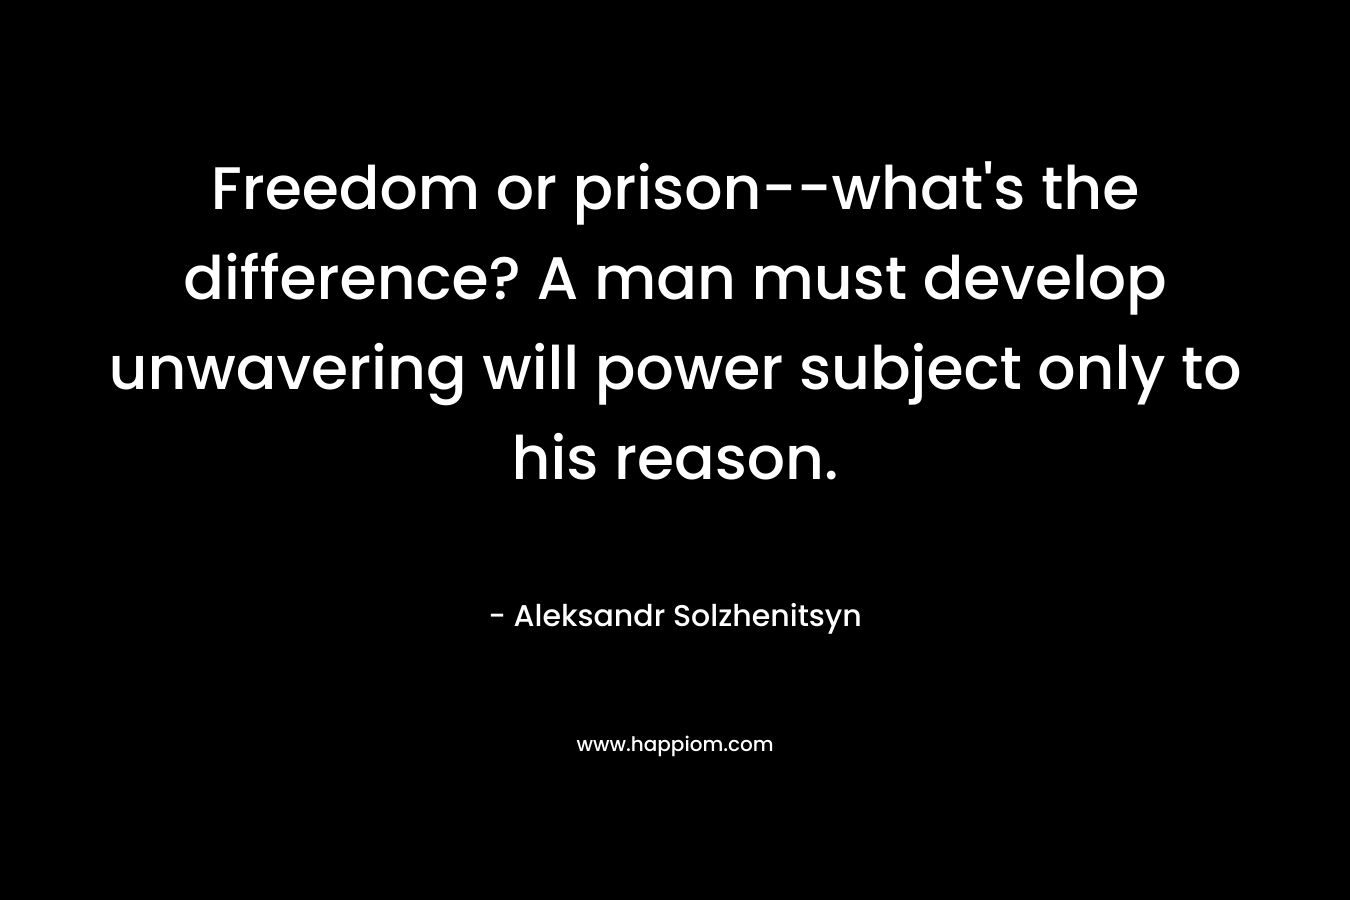 Freedom or prison–what’s the difference? A man must develop unwavering will power subject only to his reason. – Aleksandr Solzhenitsyn